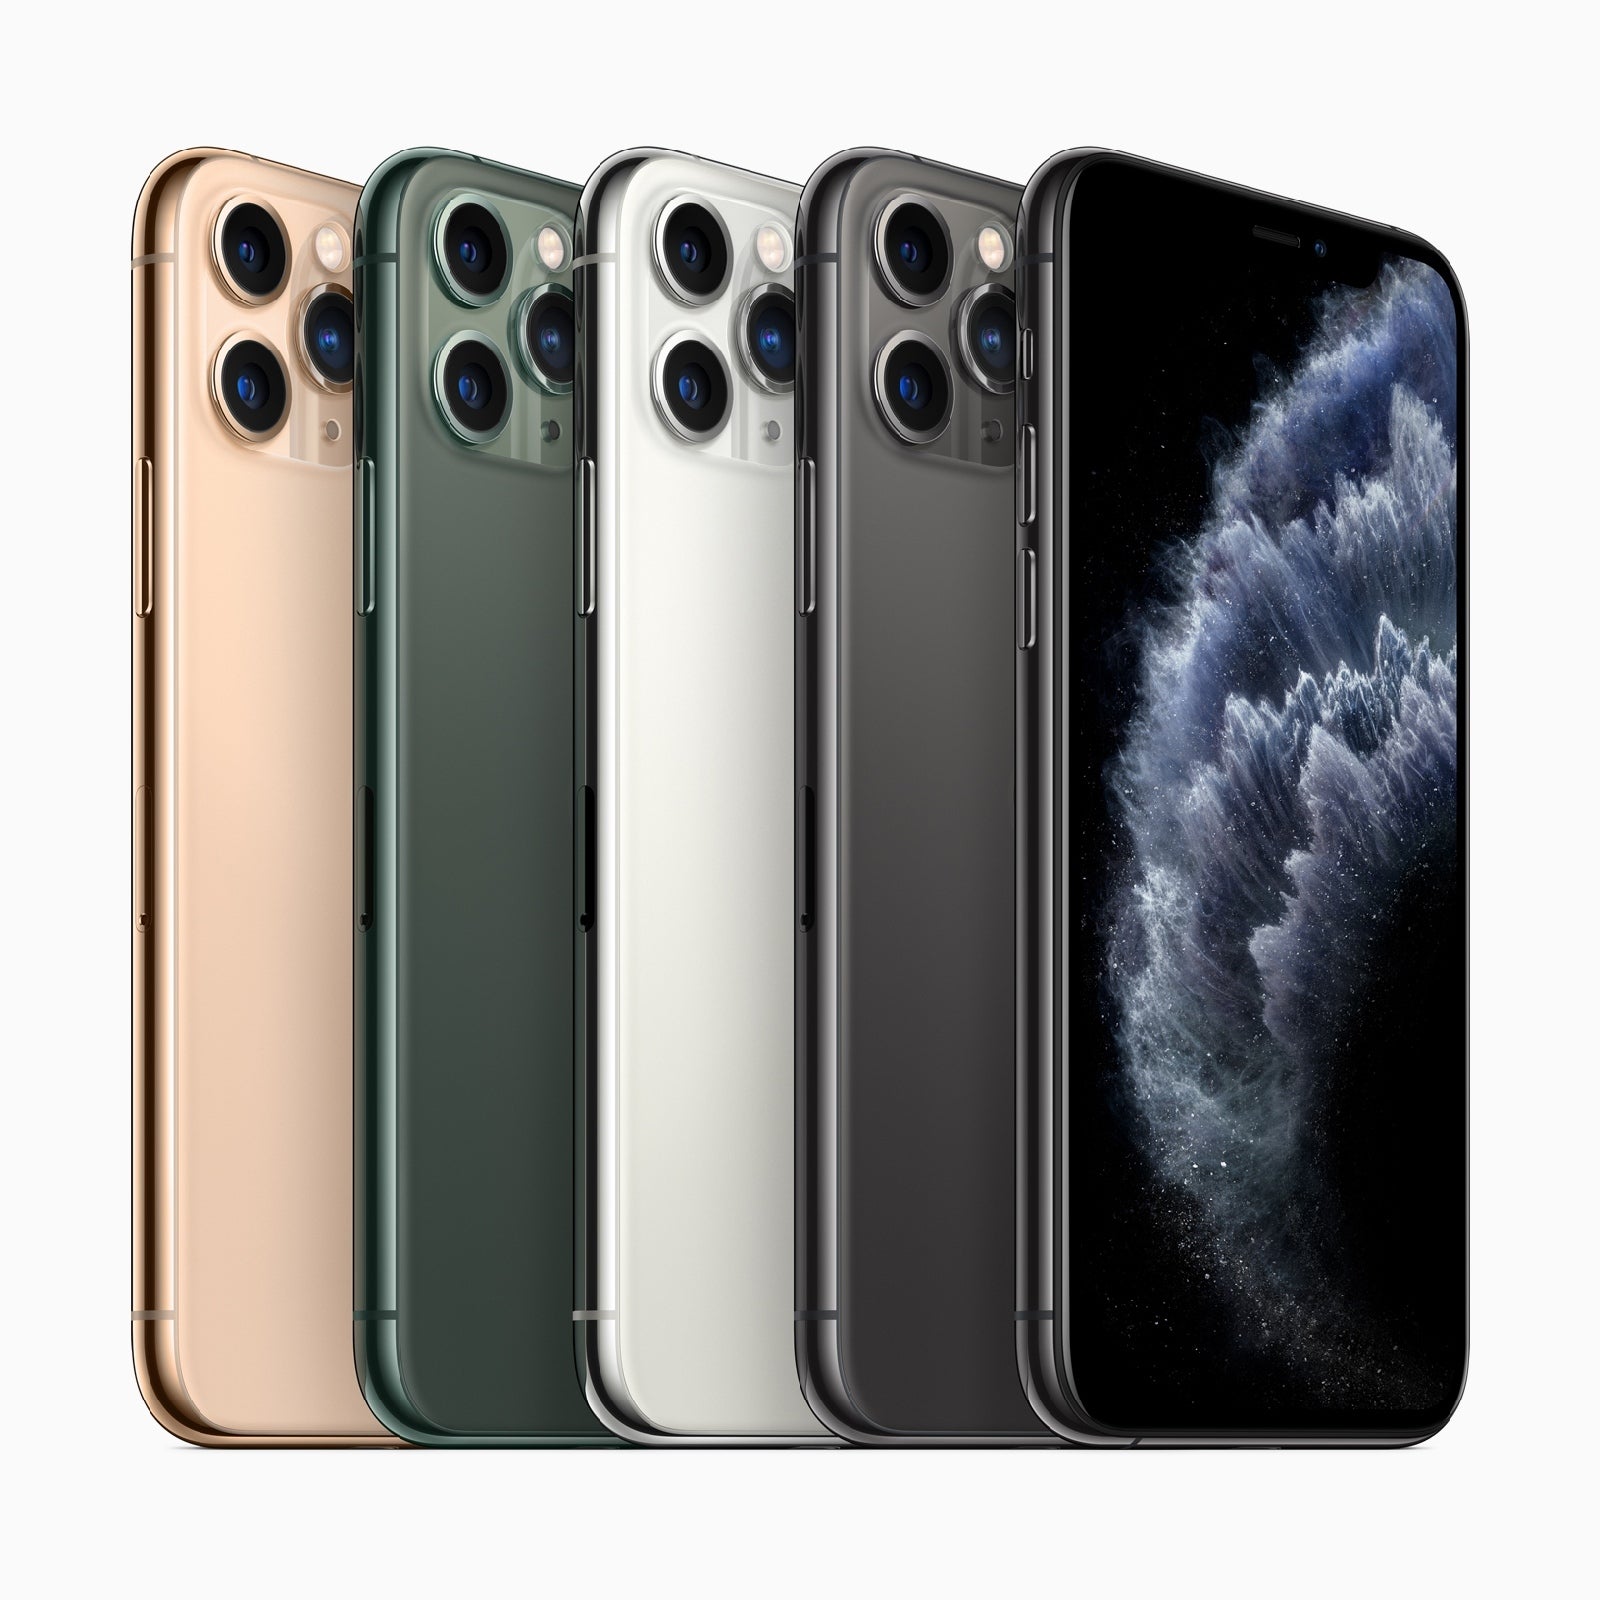 iPhone 11 Pro - Apple announces iPhone 11, iPhone 11 Pro and 11 Pro Max